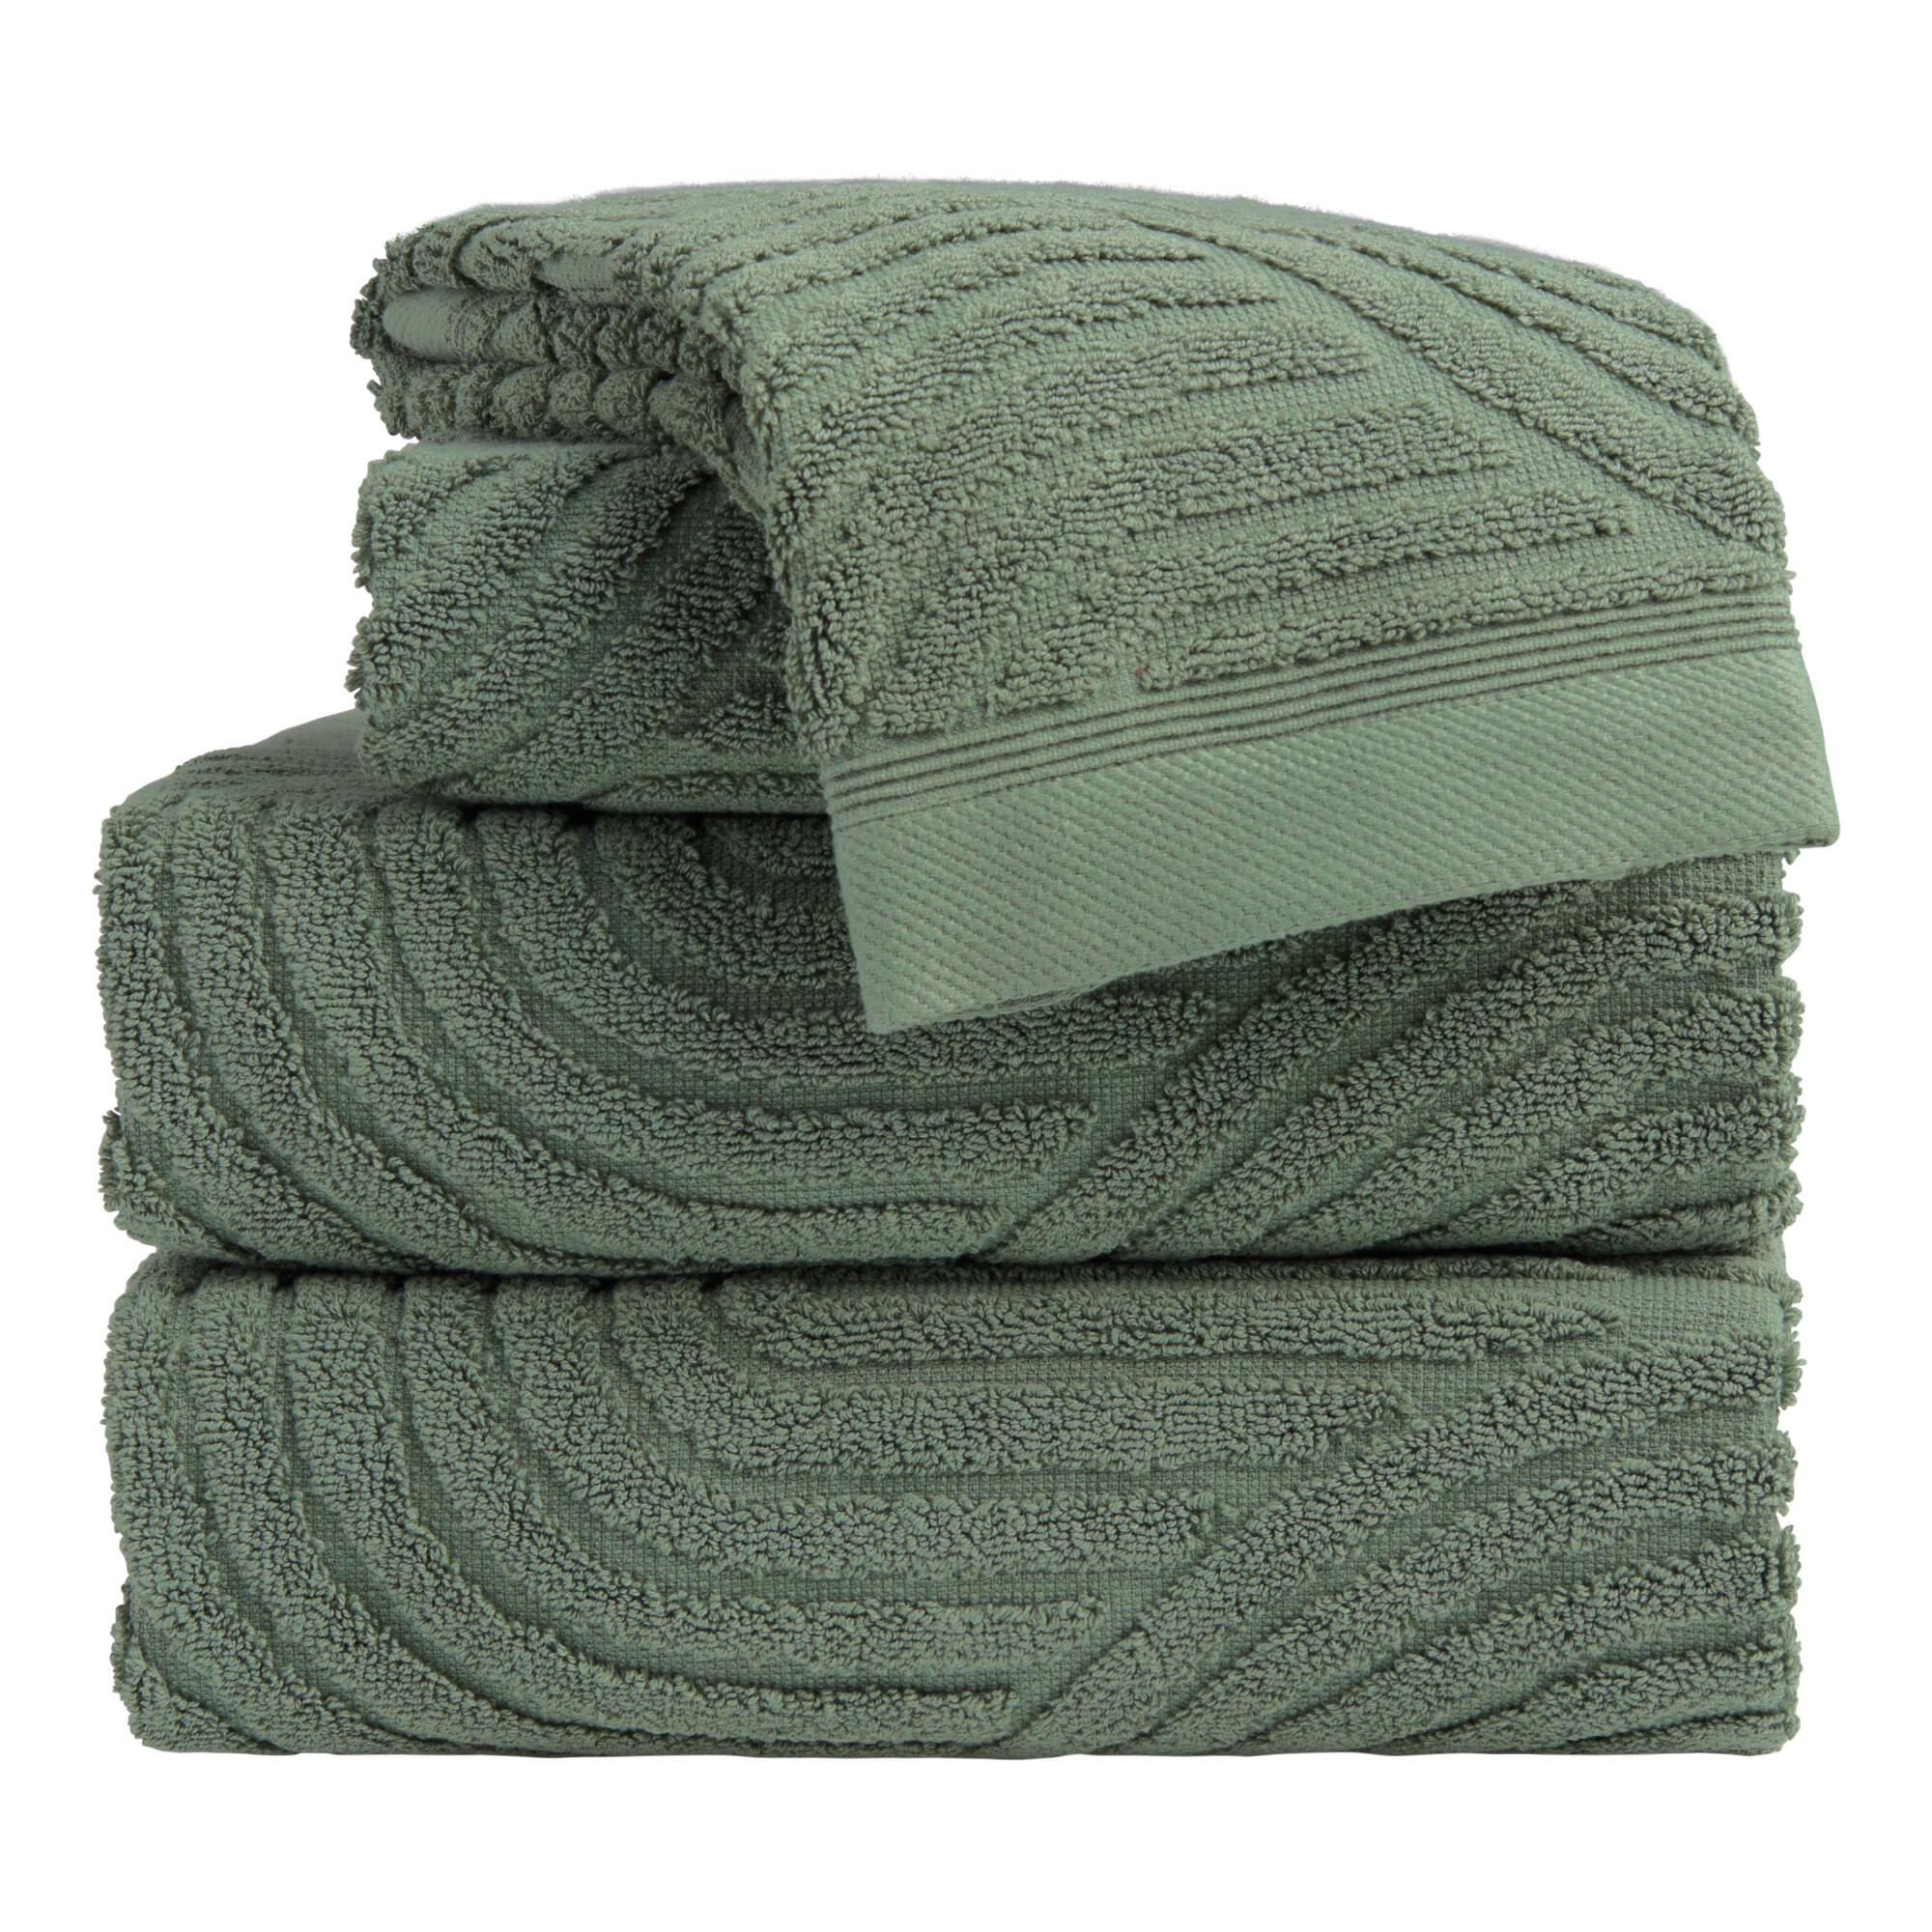 Laurel Wreath Green Sculpted Arches Towel Collection by World Market